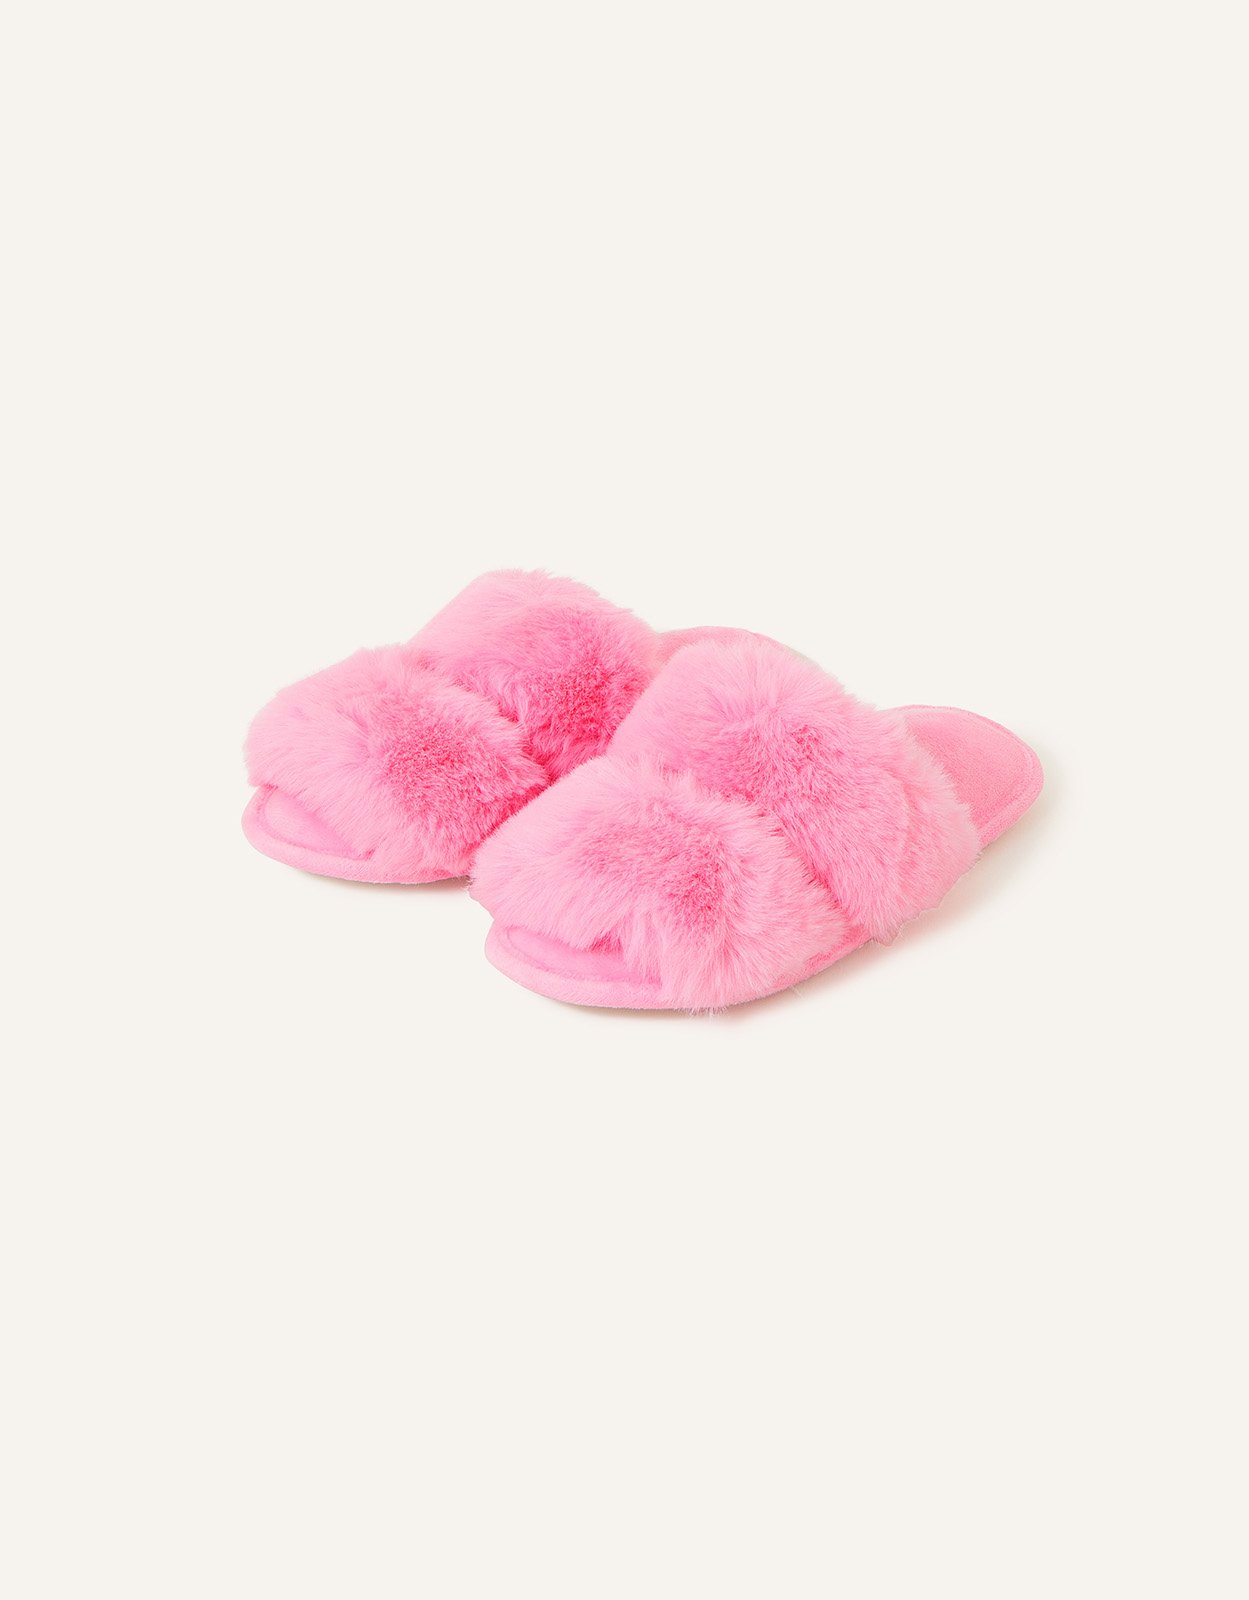 Accessorize Women's Faux Fur Double Band Sliders Pink, Size: S